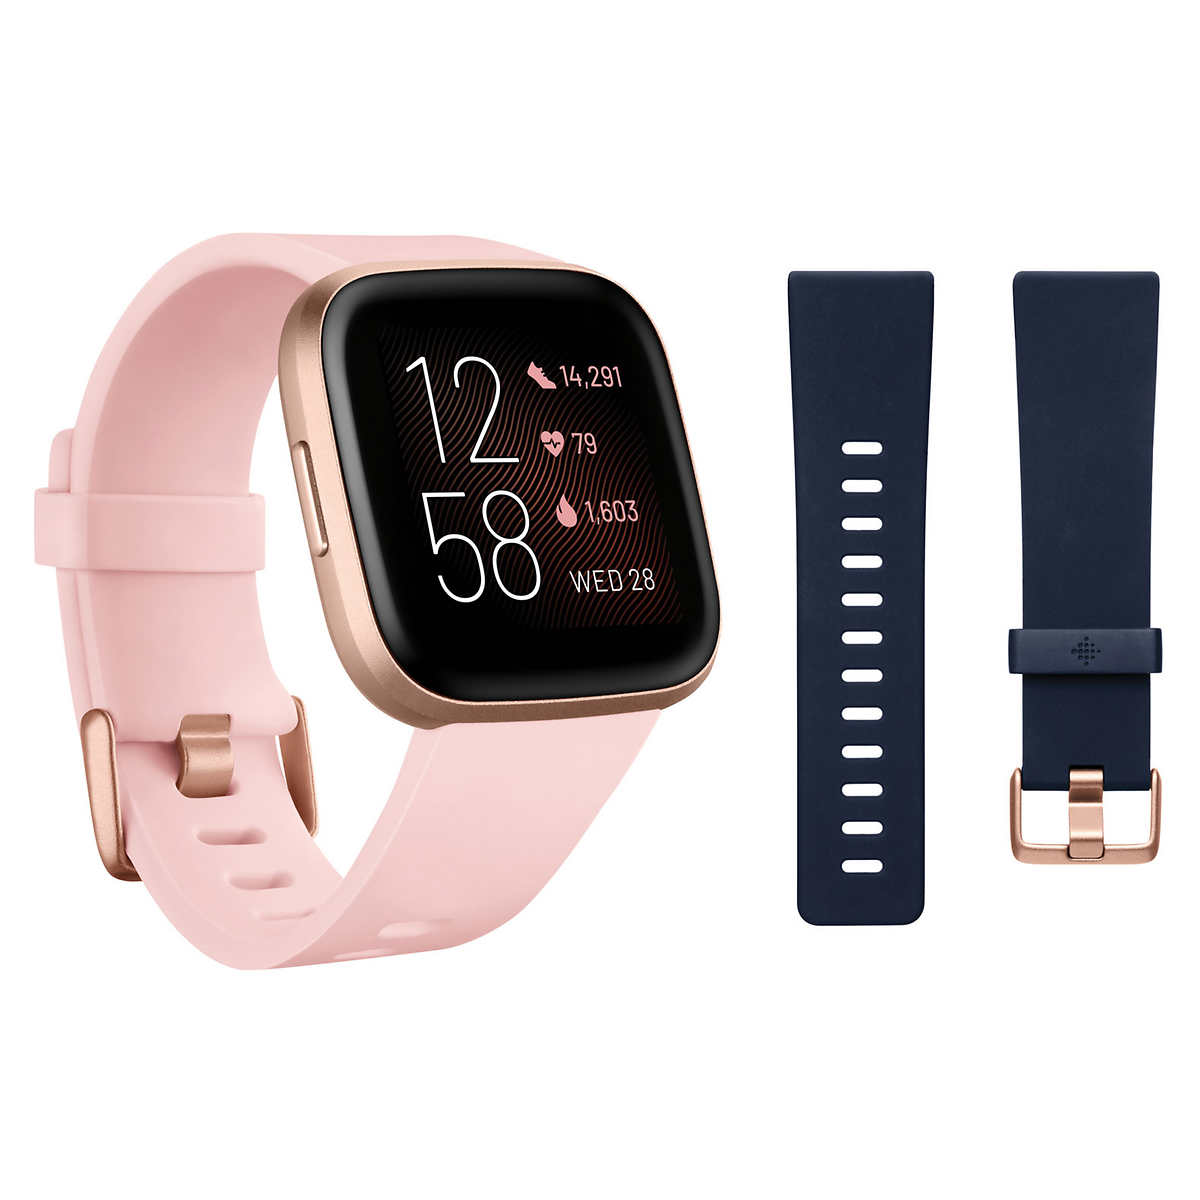 Fitbit Versa 2 Petal Band Included Costco